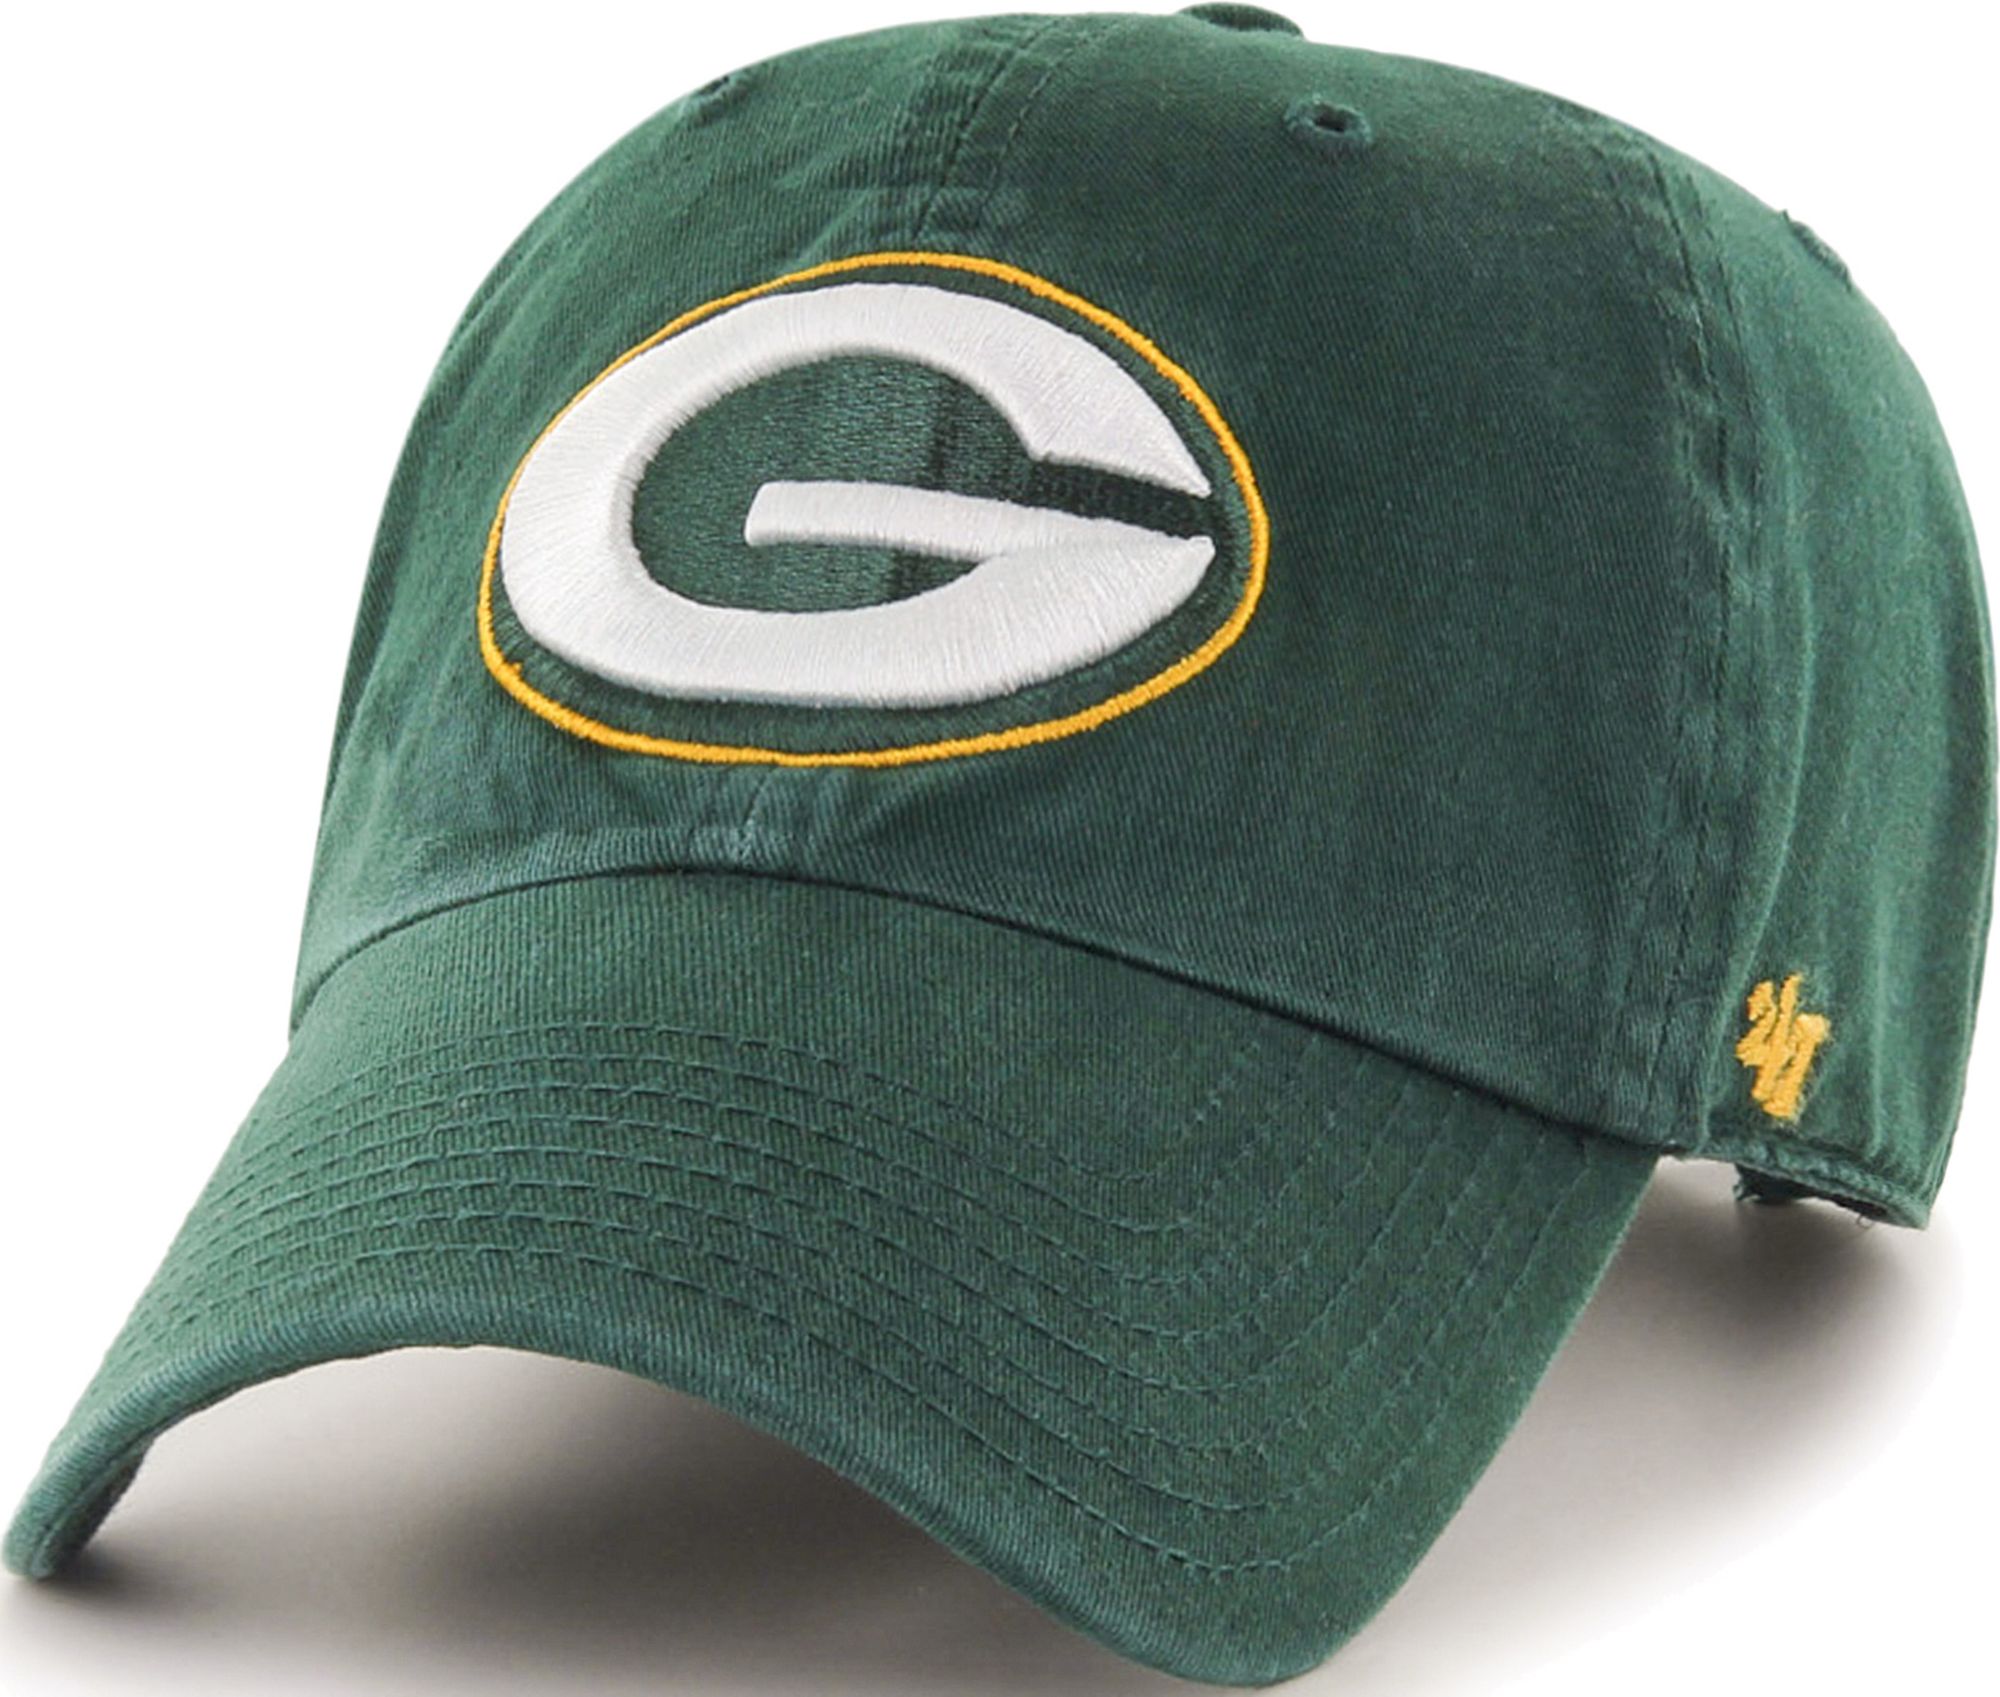 green bay packers hat